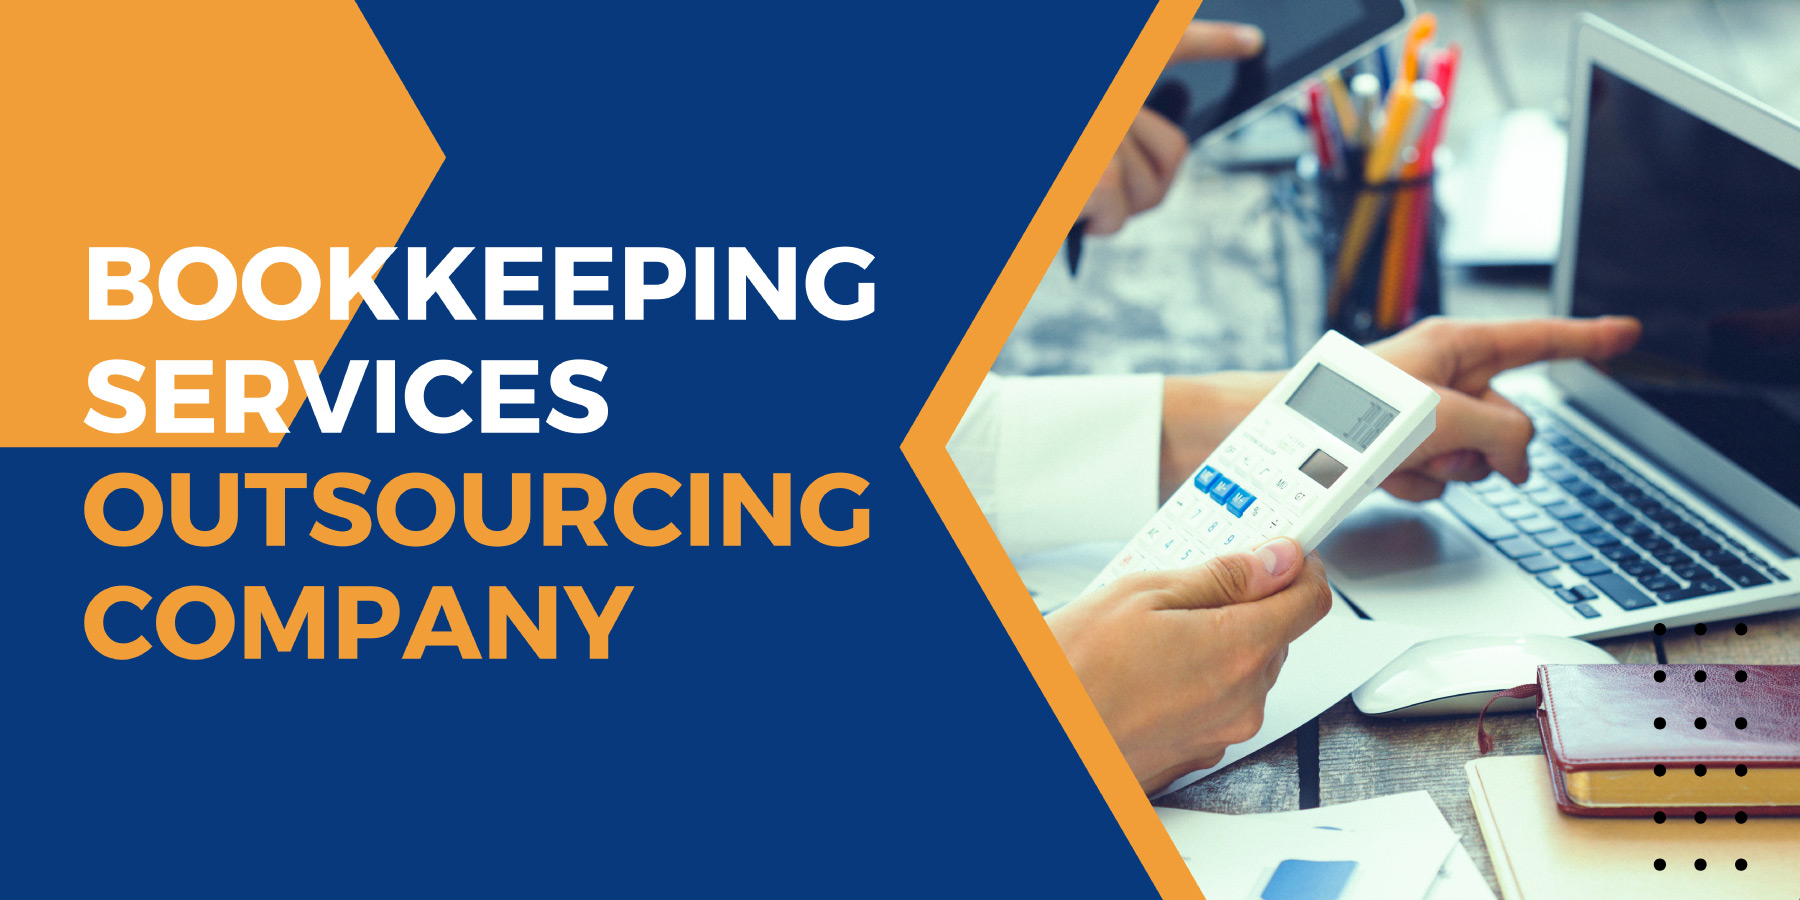 vserve | The Role of eCommerce Bookkeeping Experts in Growing Your Online Business